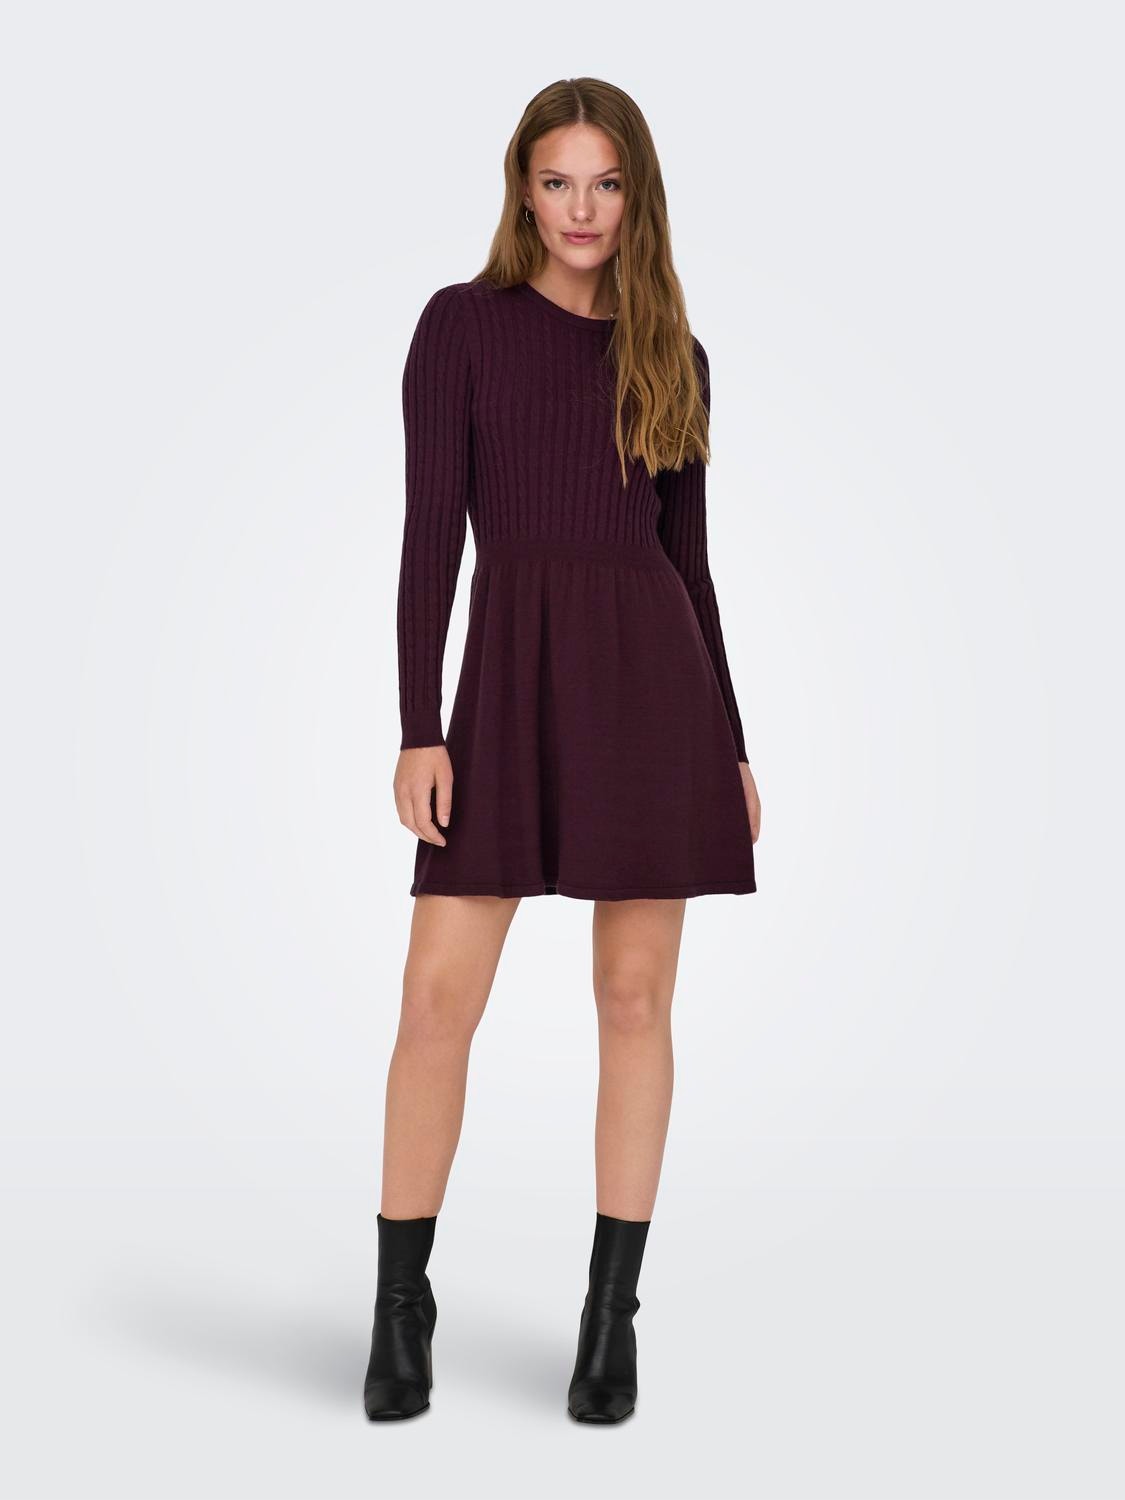 ONLY® dress knitted discount! Mini o-neck with | 30%